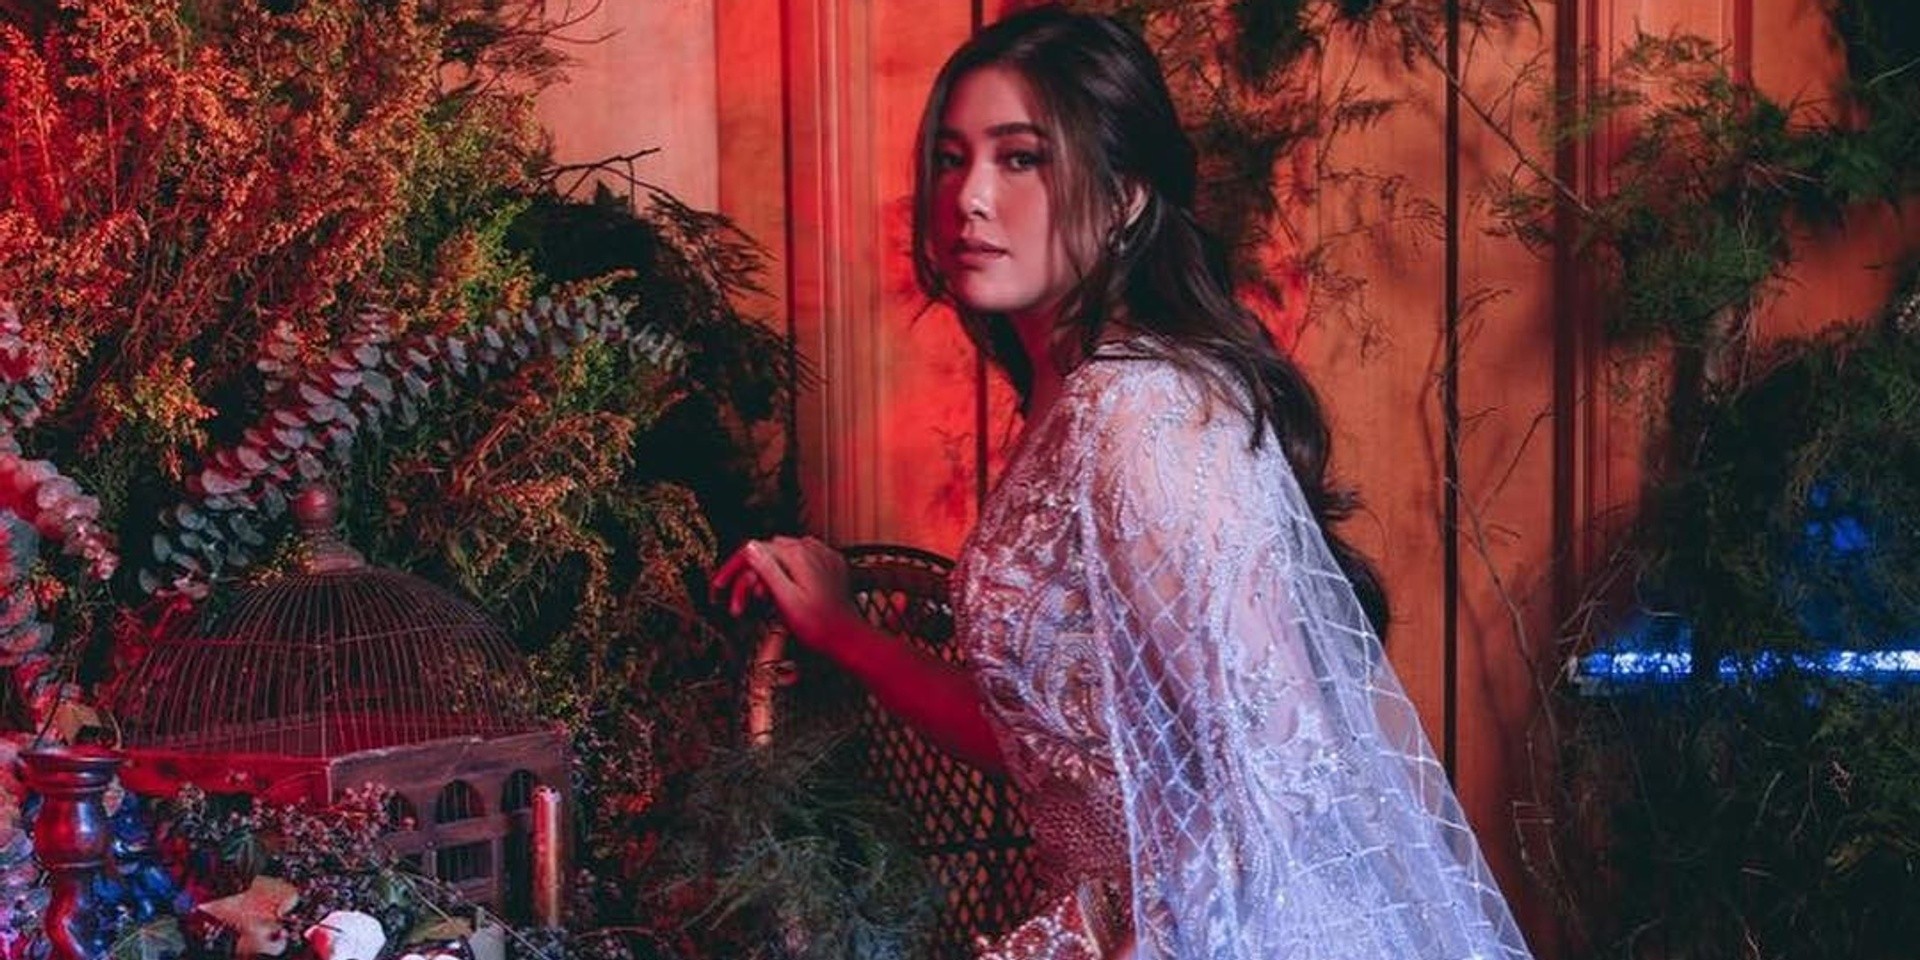 Moira Dela Torre to hold Thanksgiving Gig with December Avenue, Munimuni, I Belong to the Zoo, and more